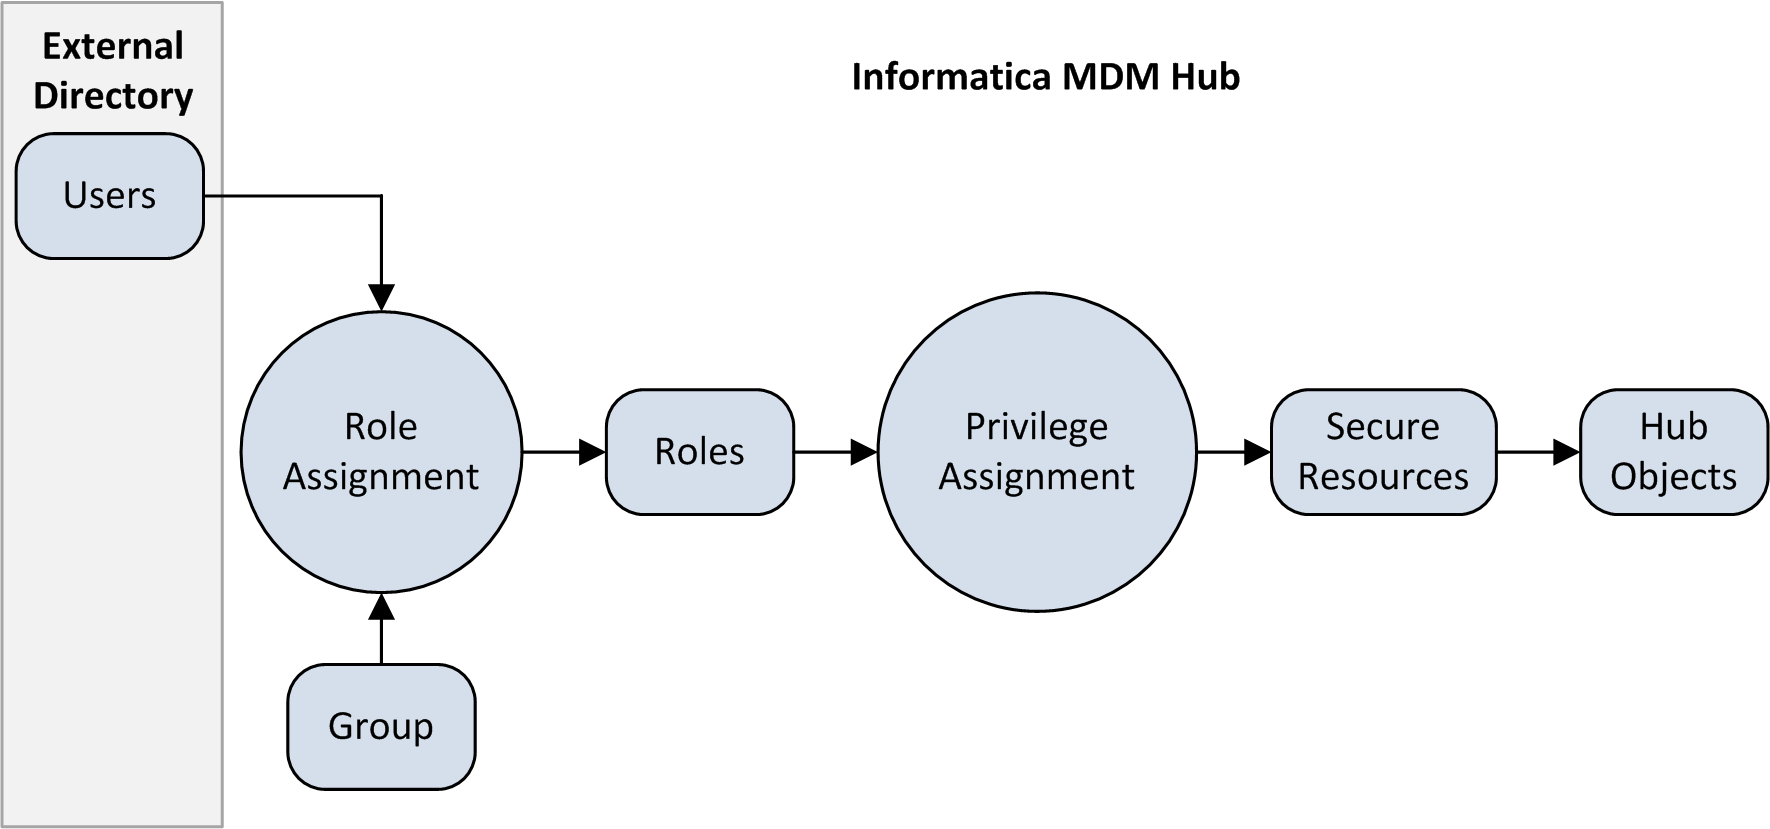 An illustration showing that the users are maintained in an external directory, and the groups are maintained in the MDM Hub. Users can perform role assignment through an external directory. The MDM Hub handles all of the following: groups can perform role assignment, which leads to roles. Roles leads to privilege assignment. Privilege assignment leads to secure resources. Secure resources leads to Hub objects. 
		  